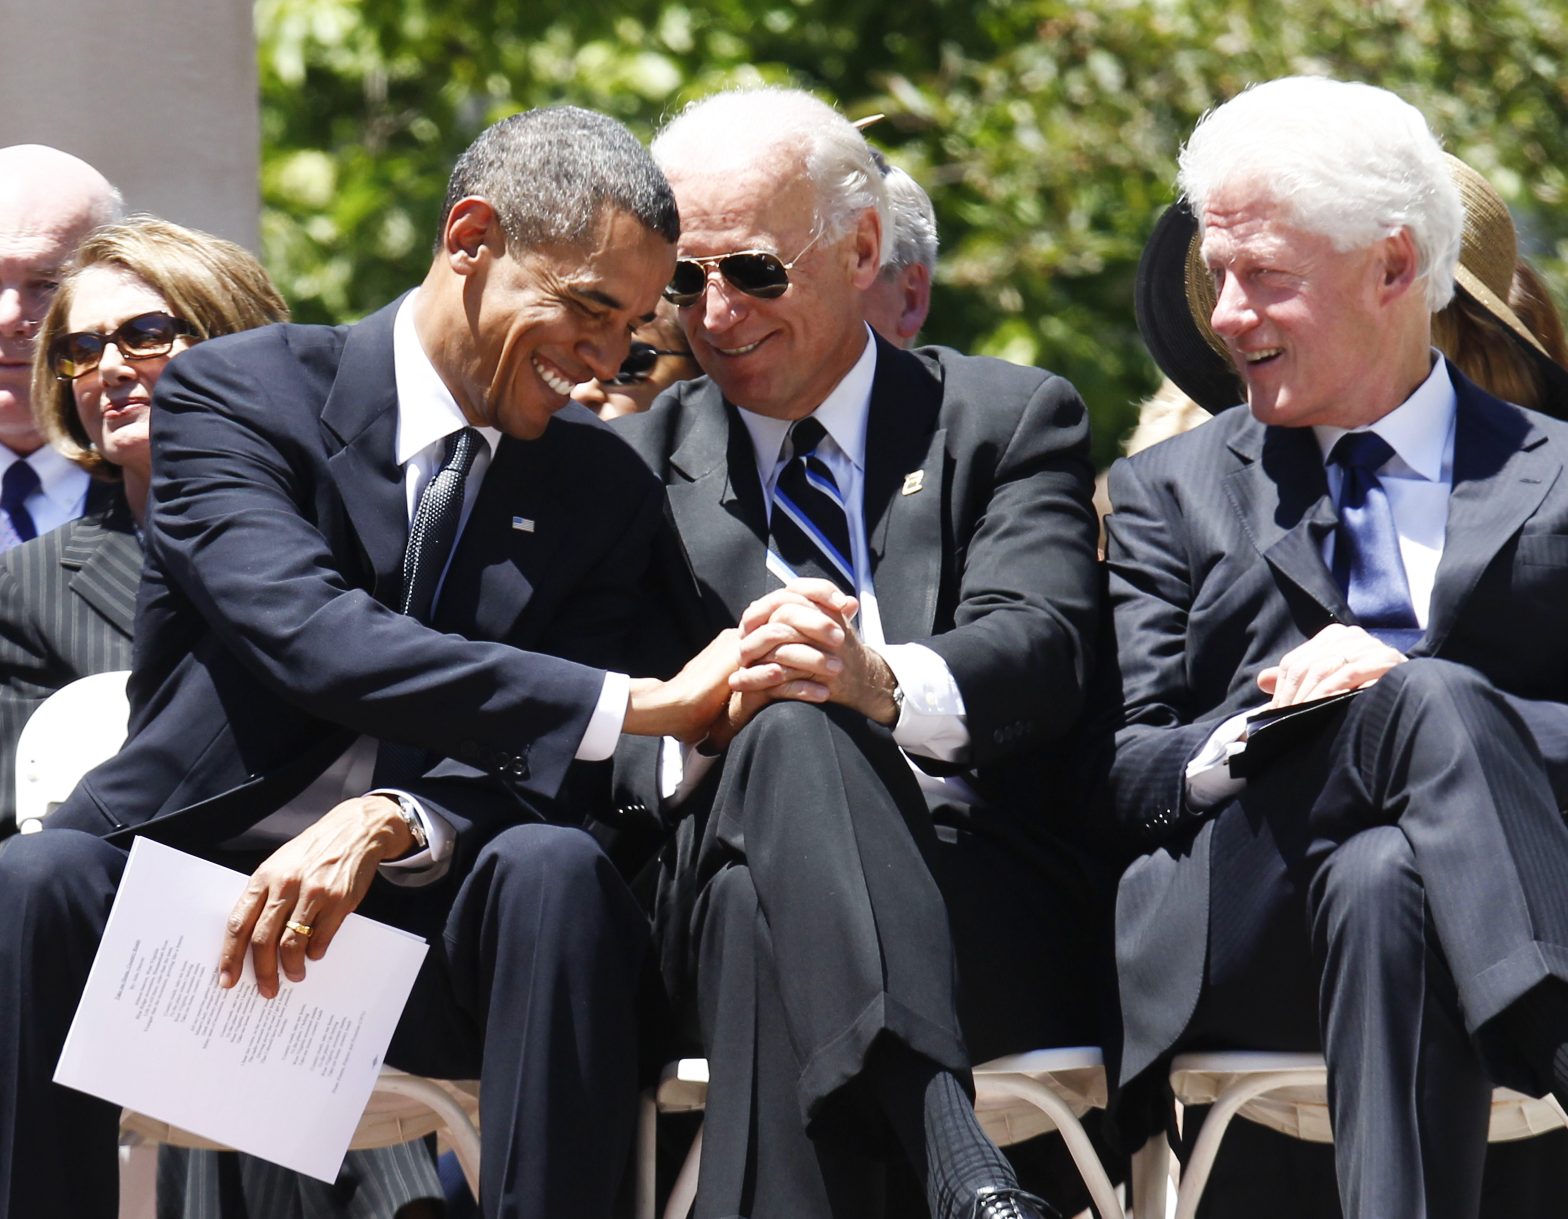 Biden Fundraiser With Obama and Clinton Nets Record High $25M, the Campaign Says